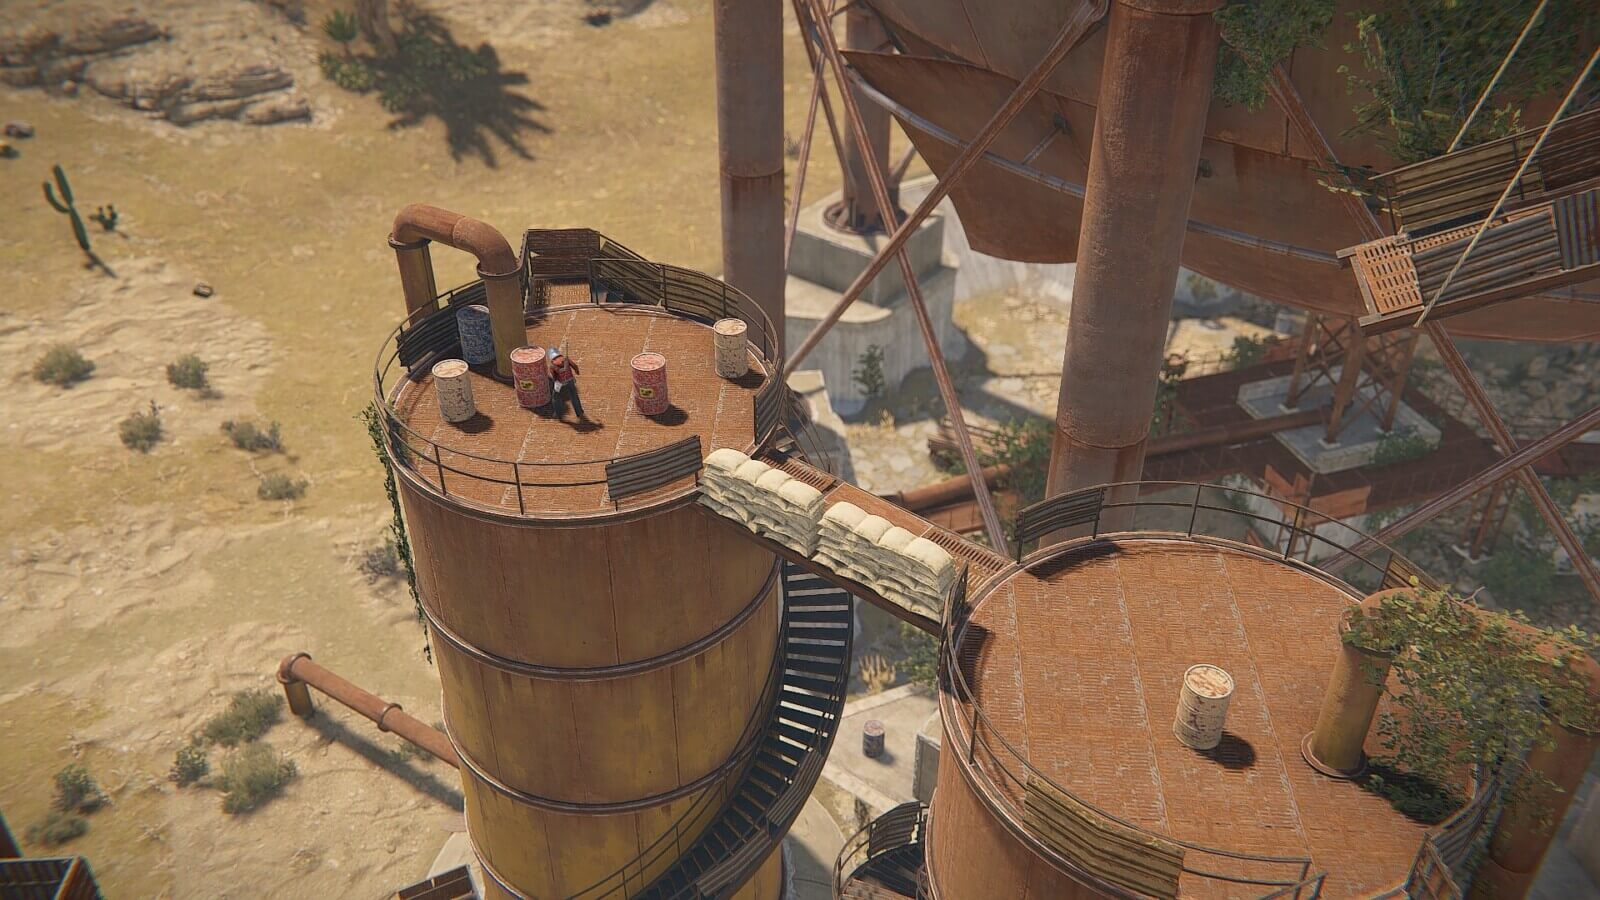 Next to the Sphere Tank you'll find 3 silos which all have several barrel spawns on top of them.